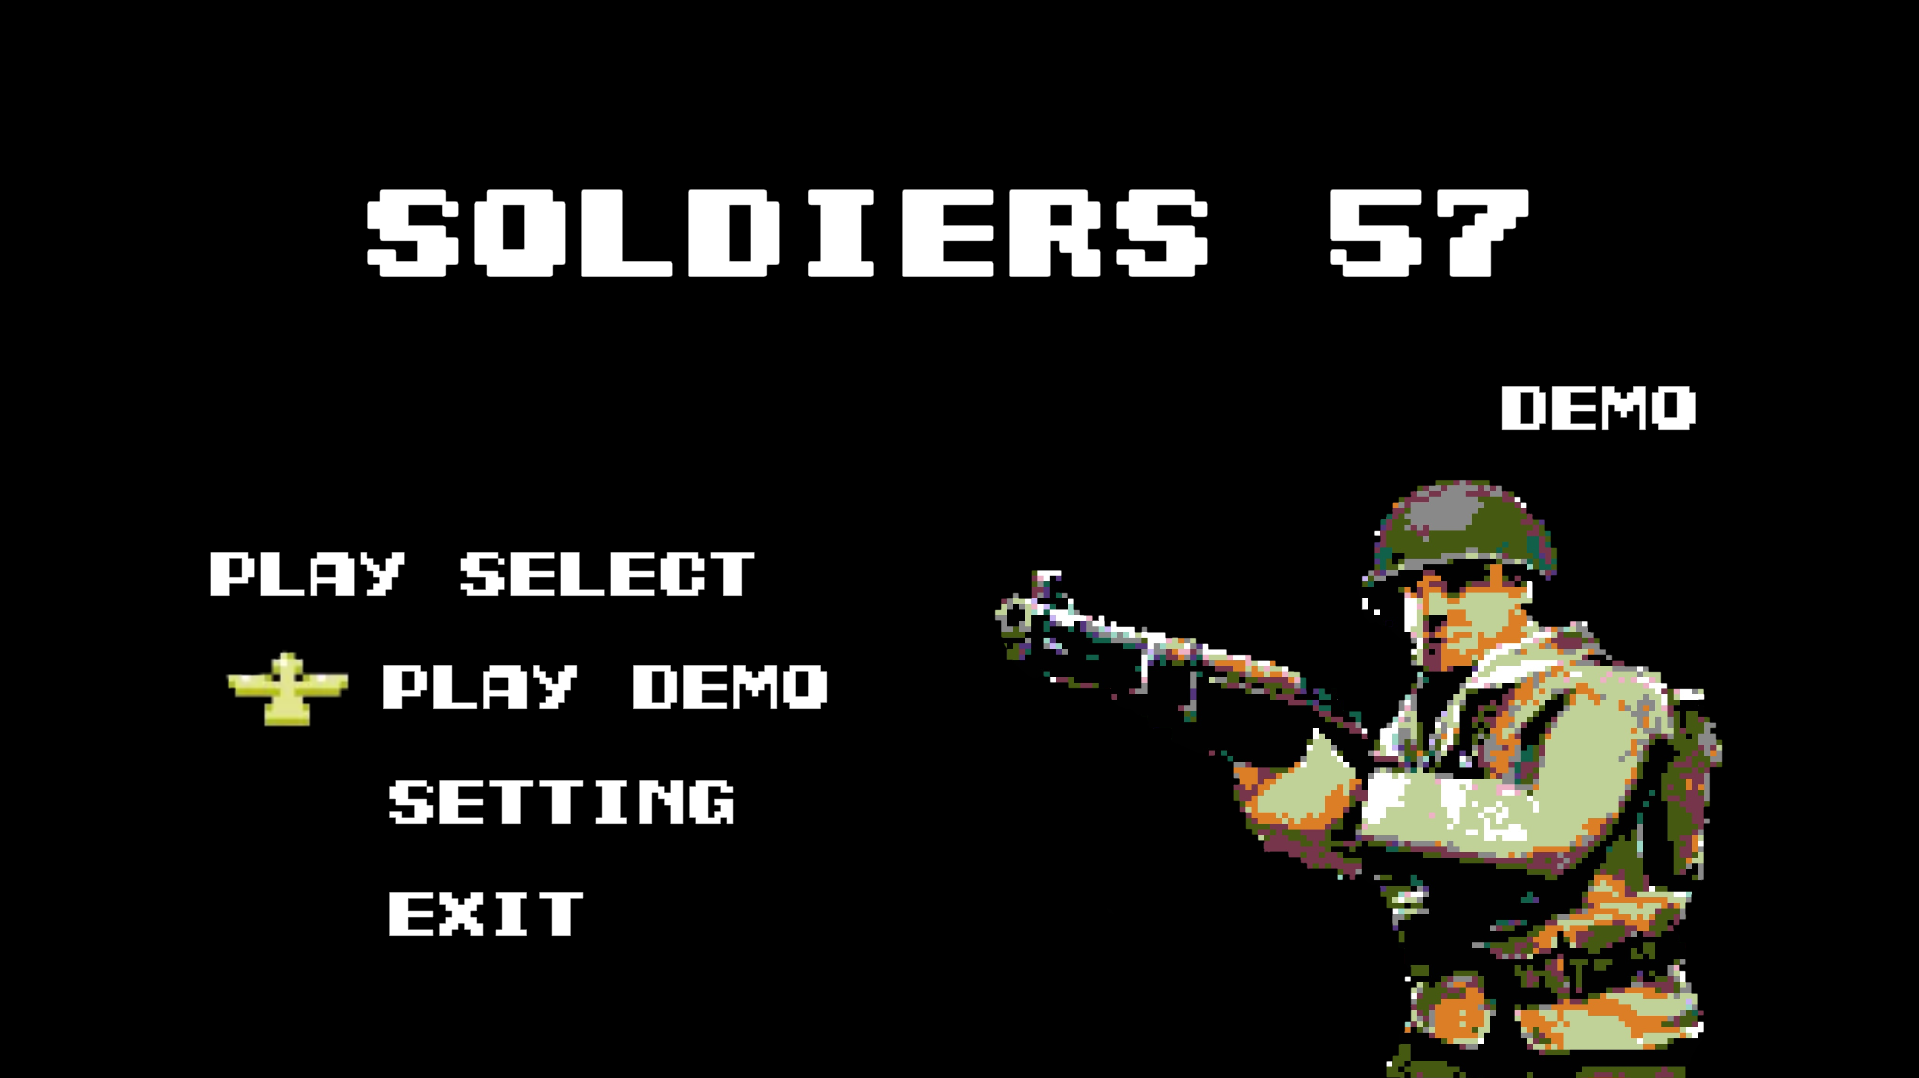 Soldiers 57 Demo